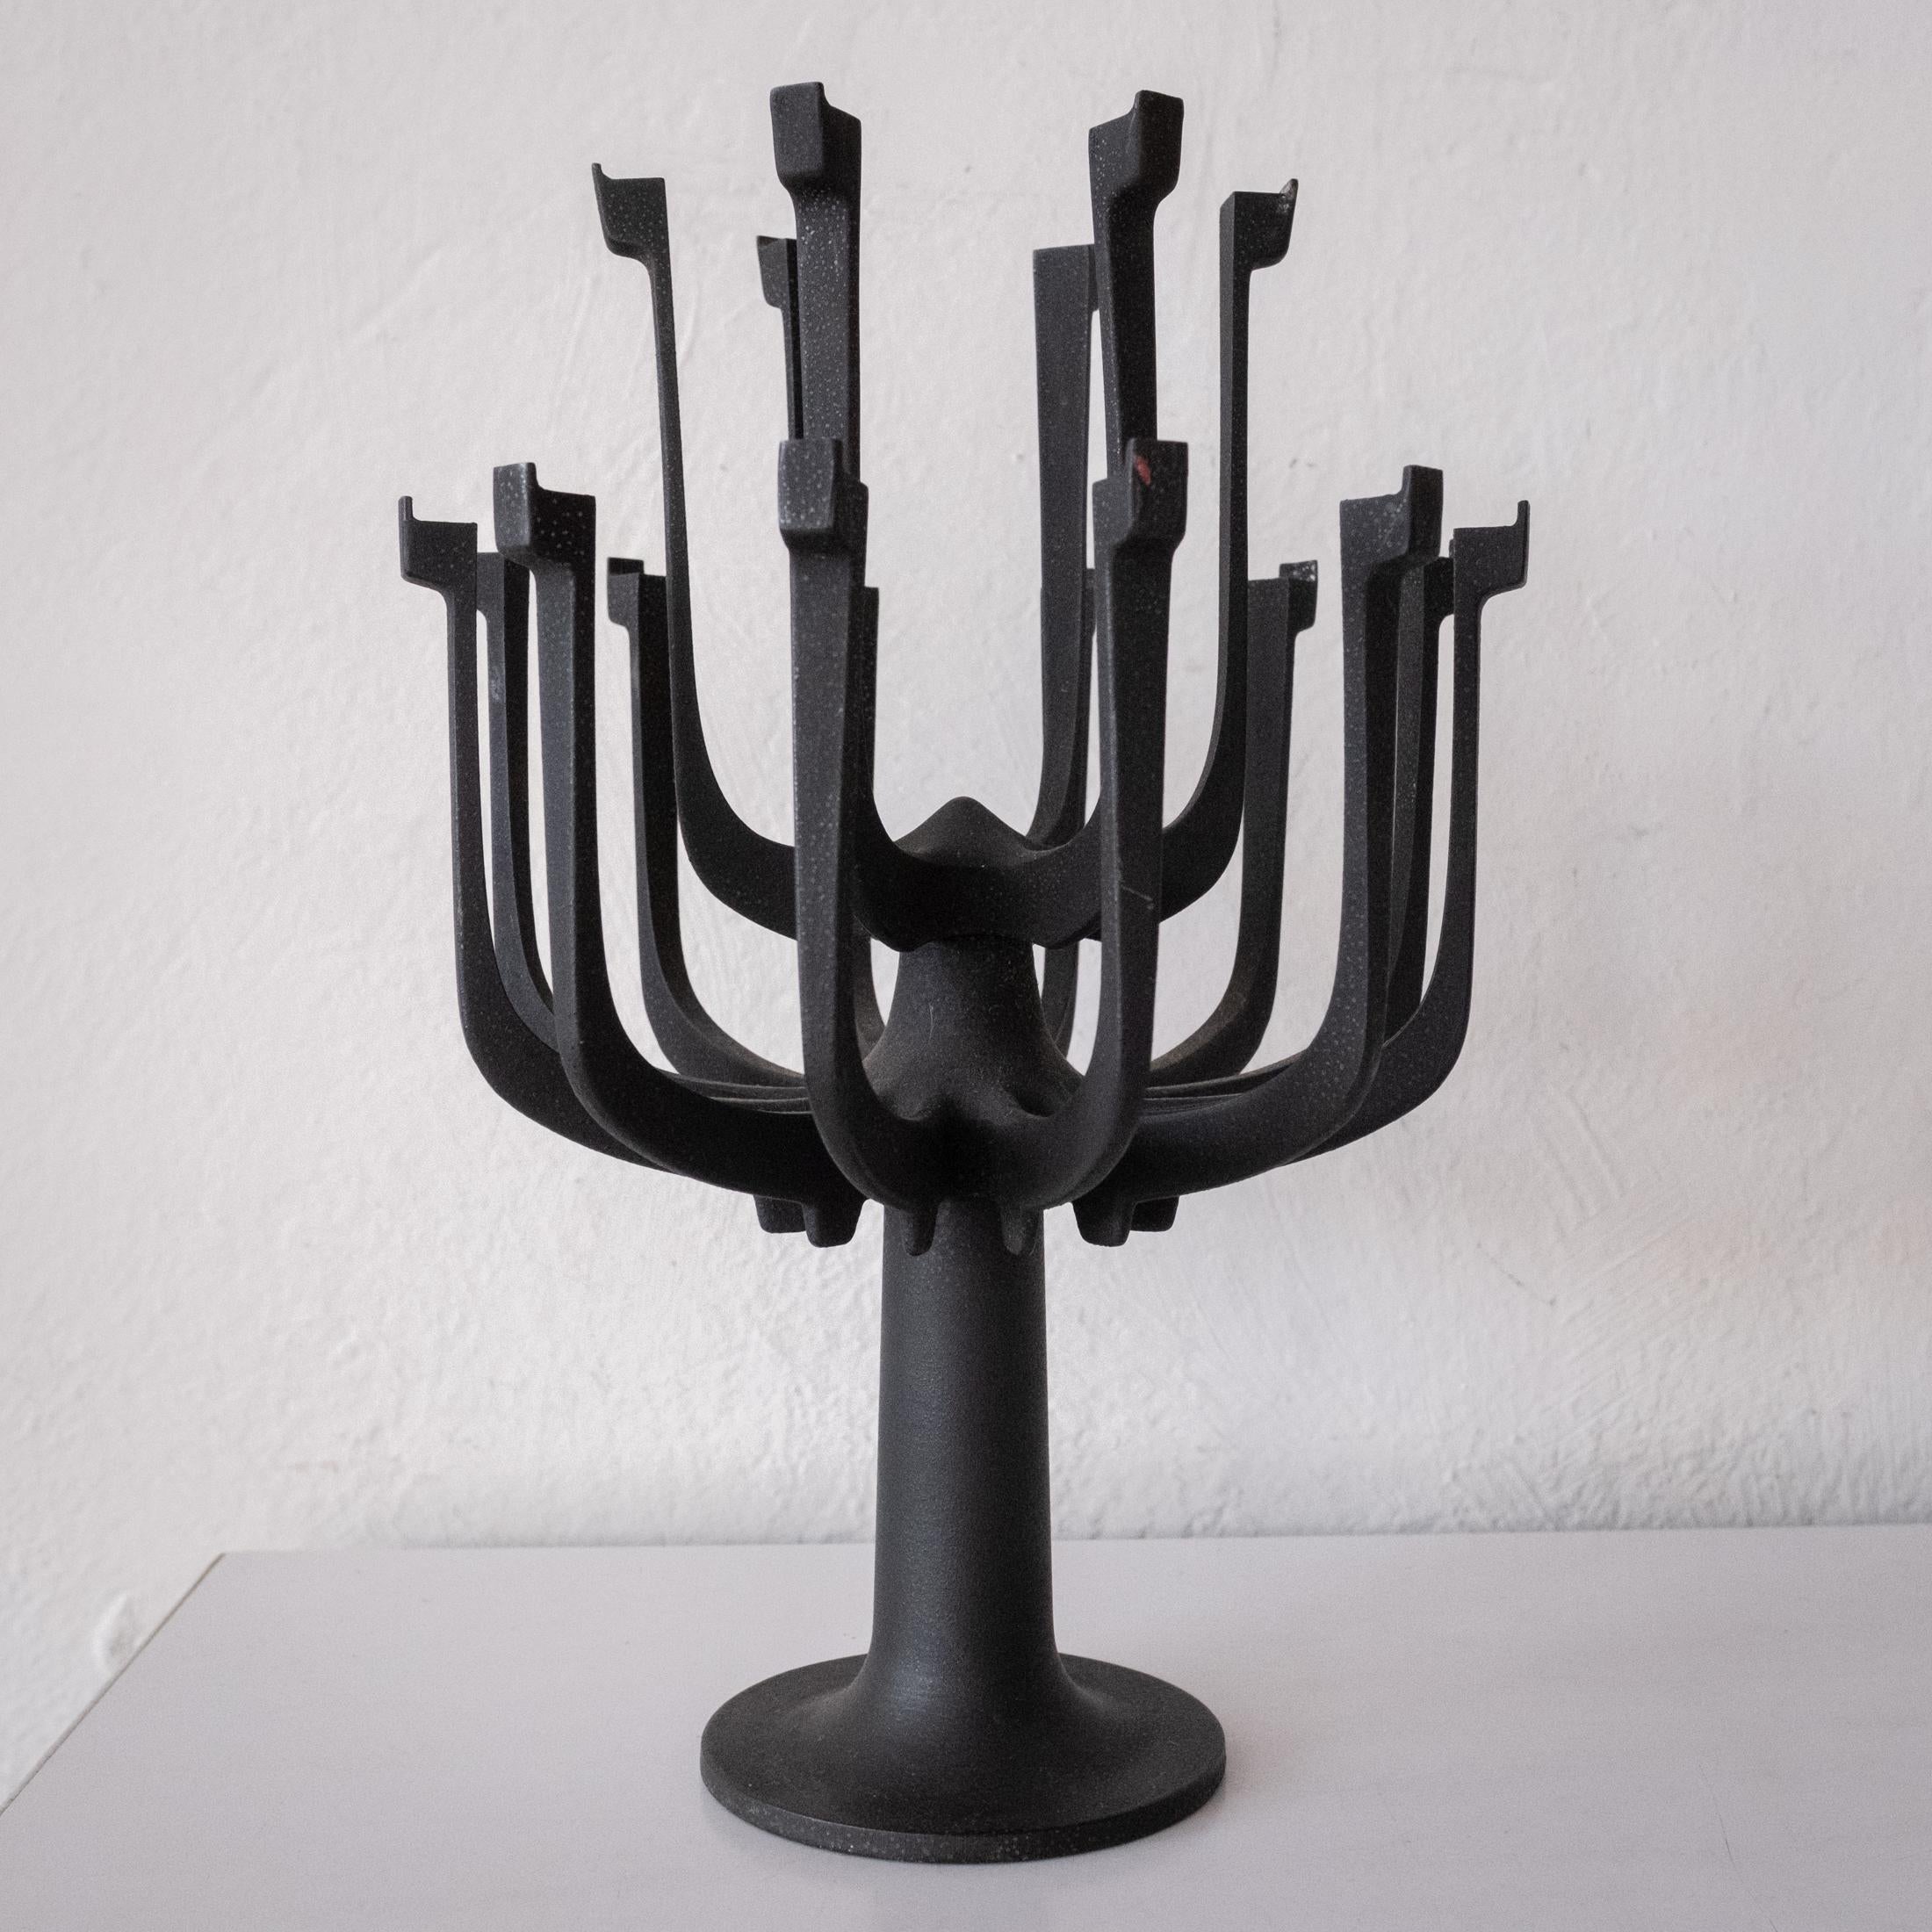 Mid-Century Modern Gunnar Cyren Lysestager Iron Candle Holder and Candles by Dansk For Sale